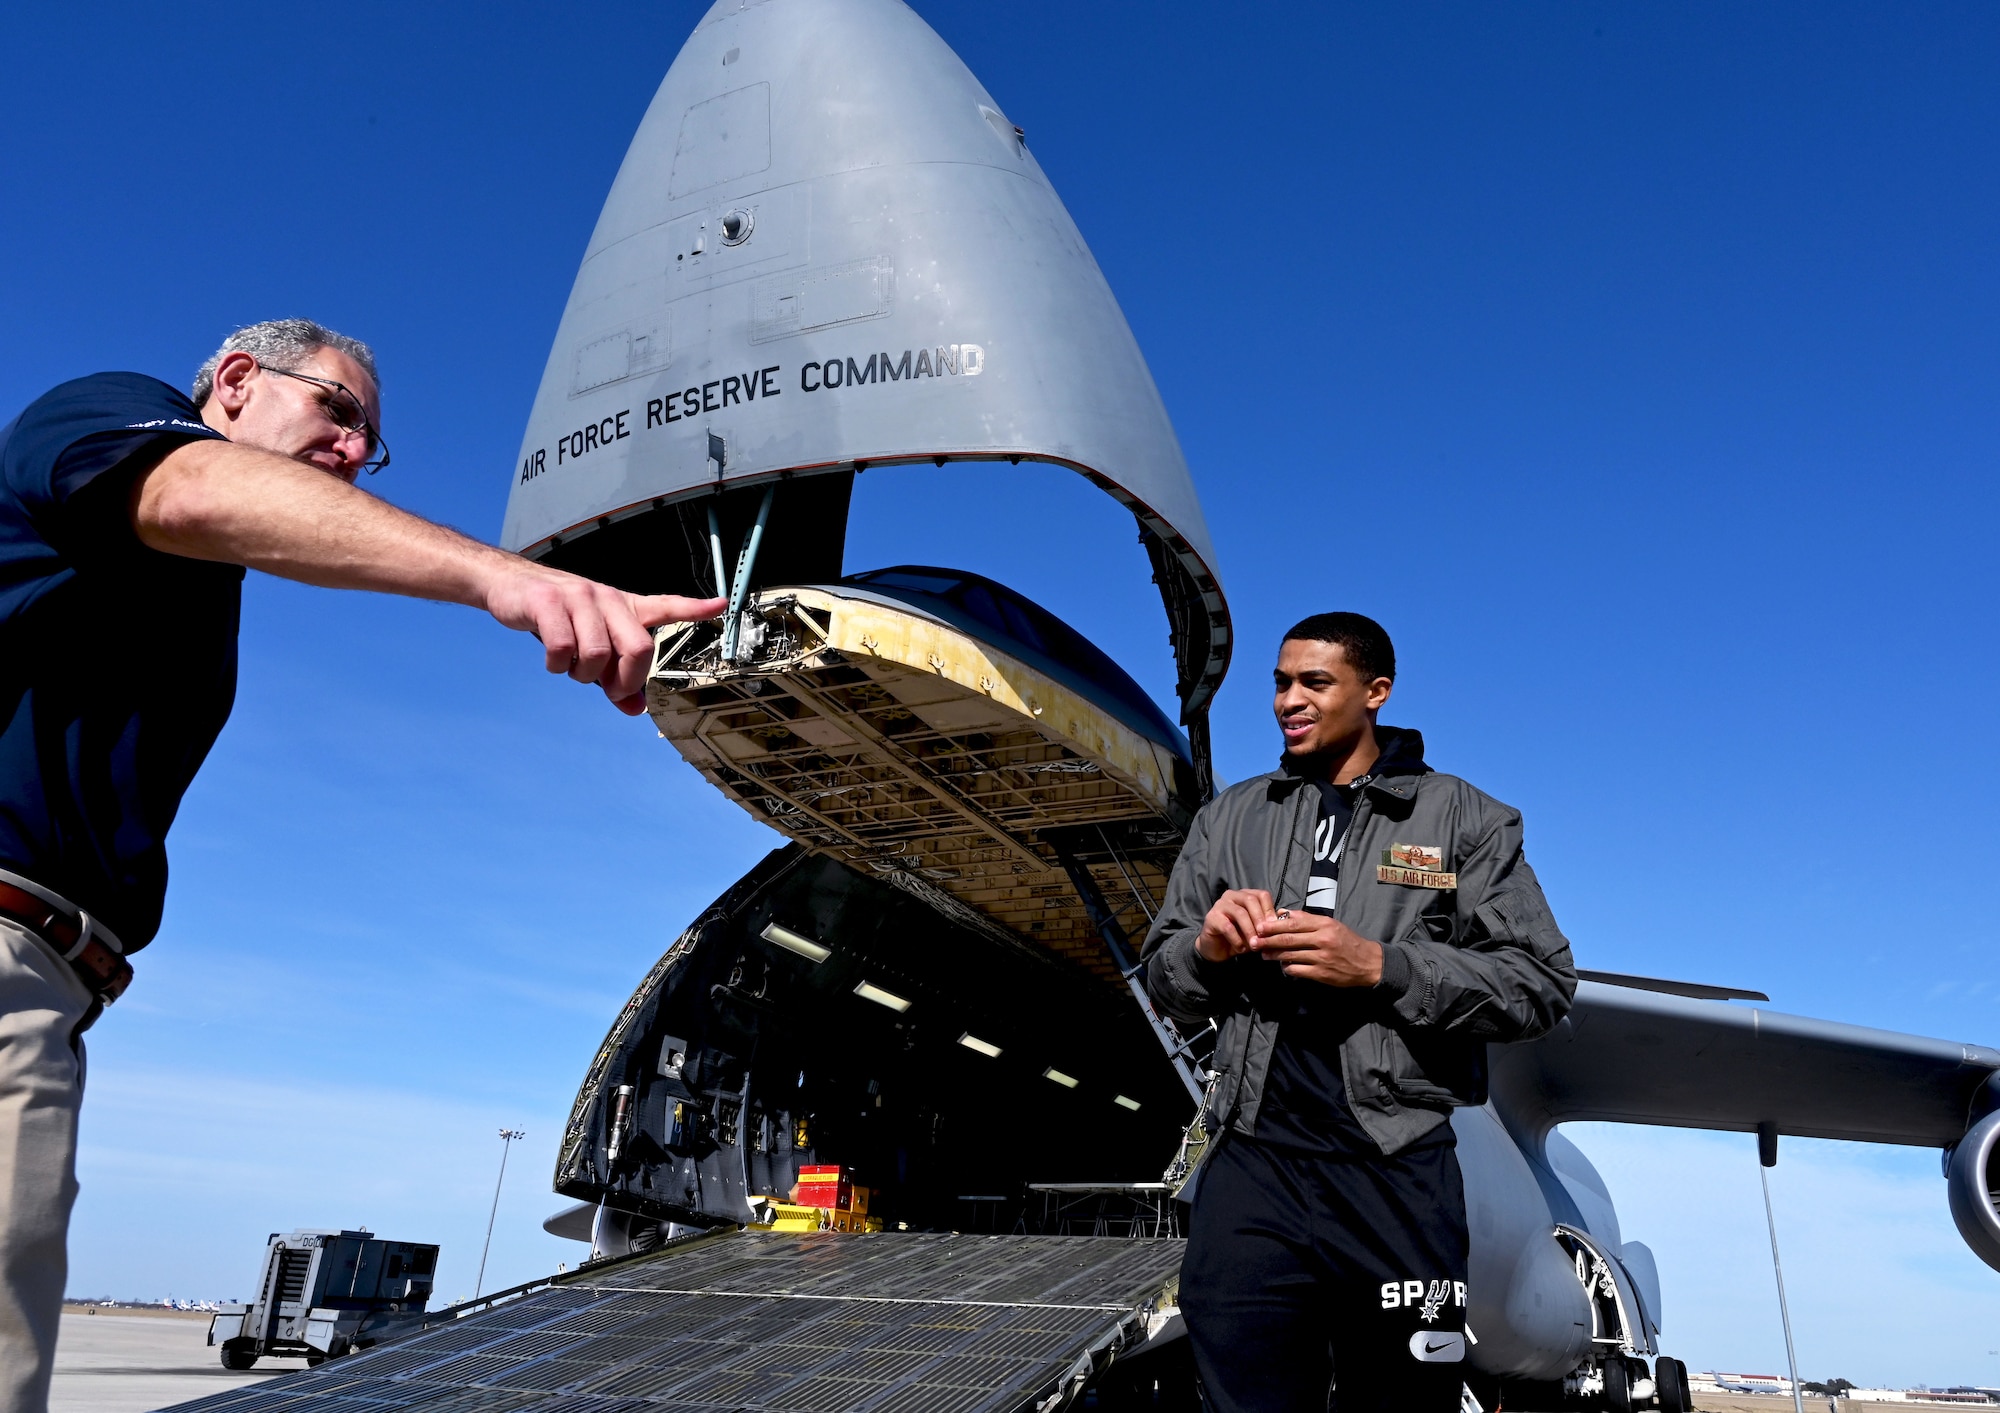 Keldon Johnson, a San Antonio Spurs basketball player, talks with Dan Mishket, USAA senior military affairs representative and field operations-south region, during his visit to the 433rd Airlift Wing at Joint Base San Antonio-Lackland, Texas, March 2, 2022. Johnson received an in-depth look at the missions and capabilities of an Air Force Reserve Command C-5M Super Galaxy aircraft. (U.S. Air Force photo by Samantha Mathison)